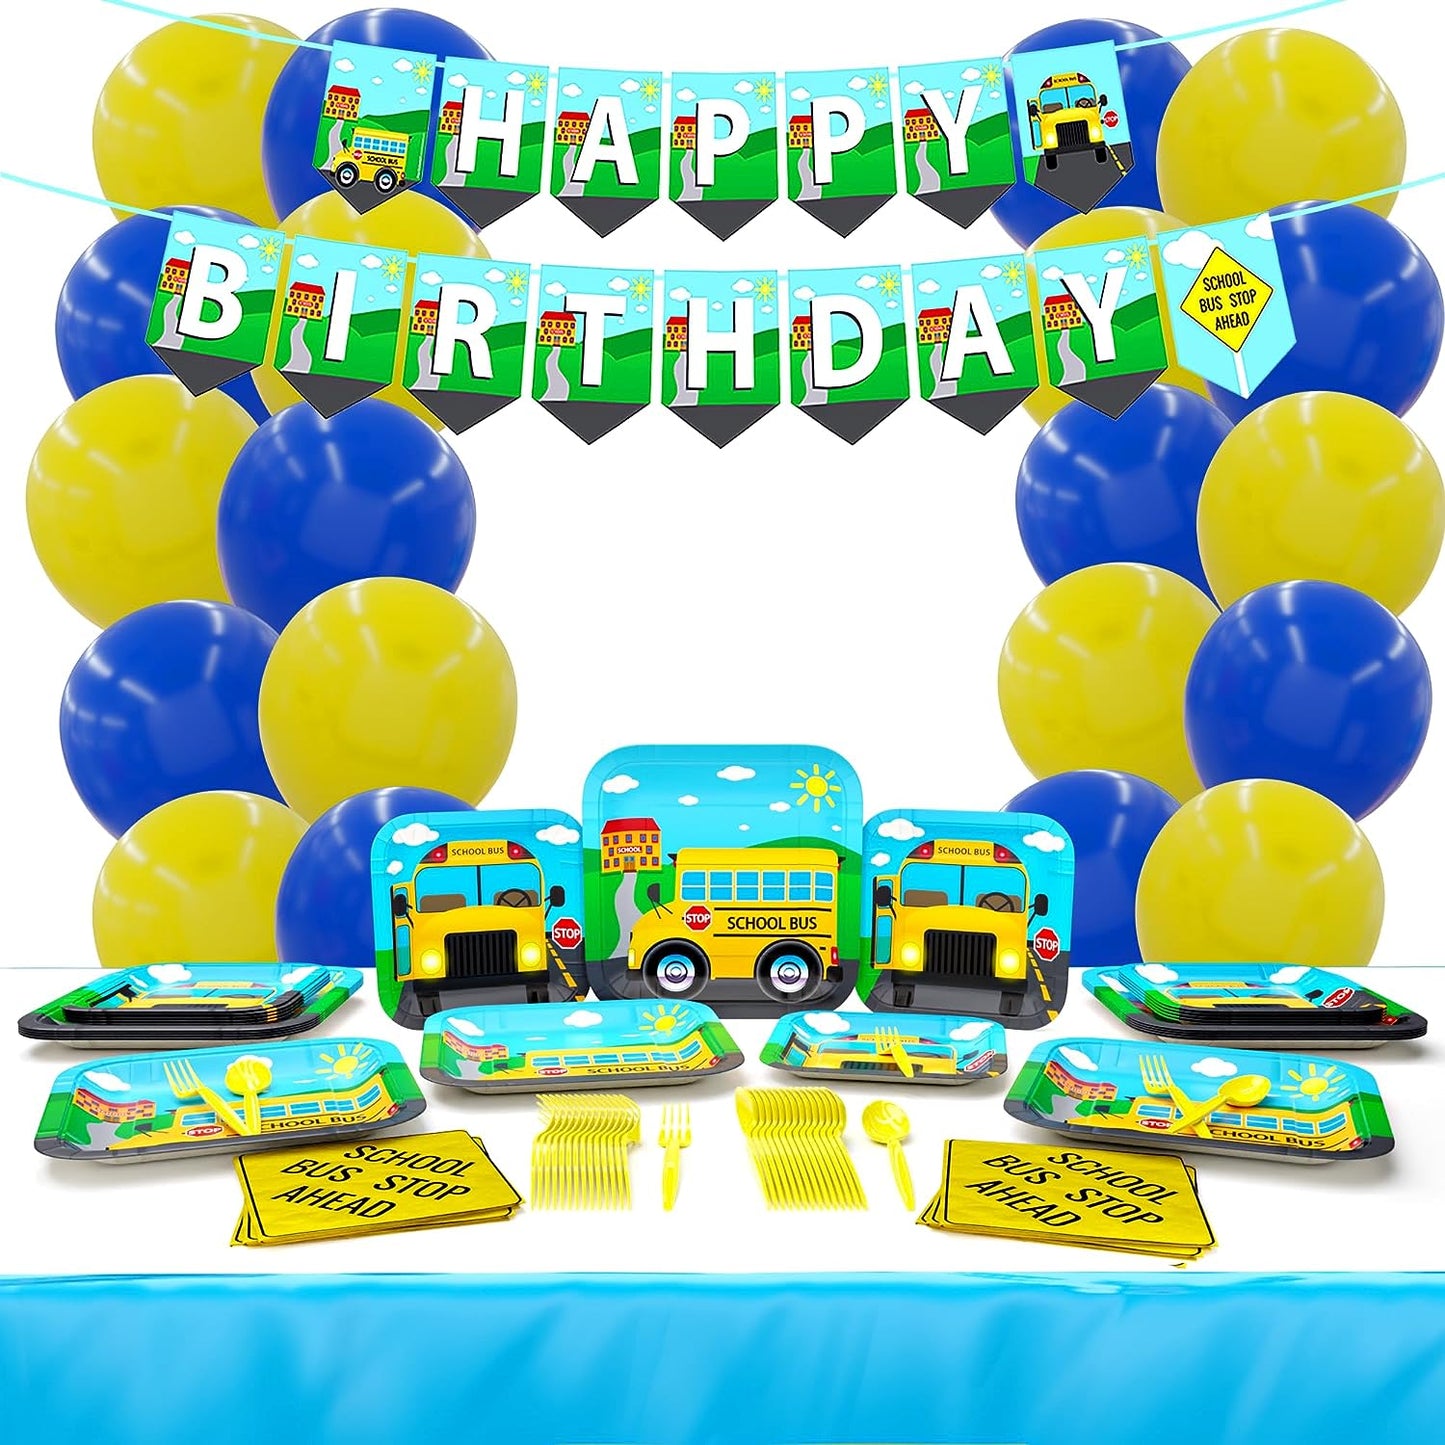 9-inch paper dinner plates, 7-inch paper dessert plates, paper lunch napkins, 108” x 54” plastic table covers, blue balloons, yellow balloons (Note: Balloons recommended size is 10-inches, overblowing may cause them to pop.), banner, yellow plastic forks, and yellow plastic spoons